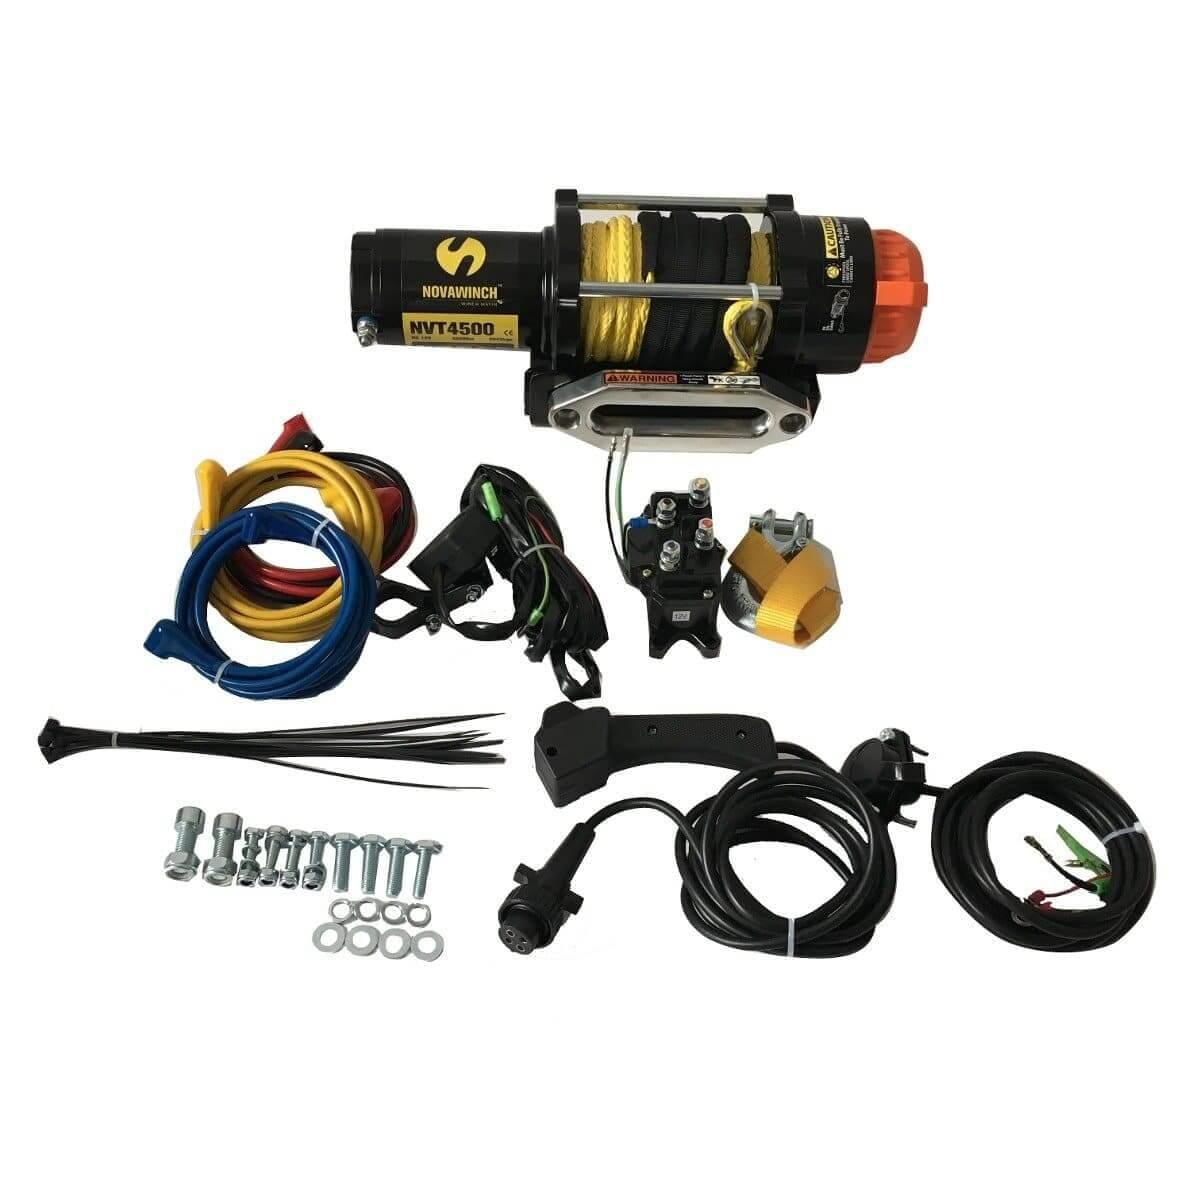 Novawinch NVT4500 ATV series winch 4500lb - c/w fairlead and remote - synthetic rope - NZ Offroader